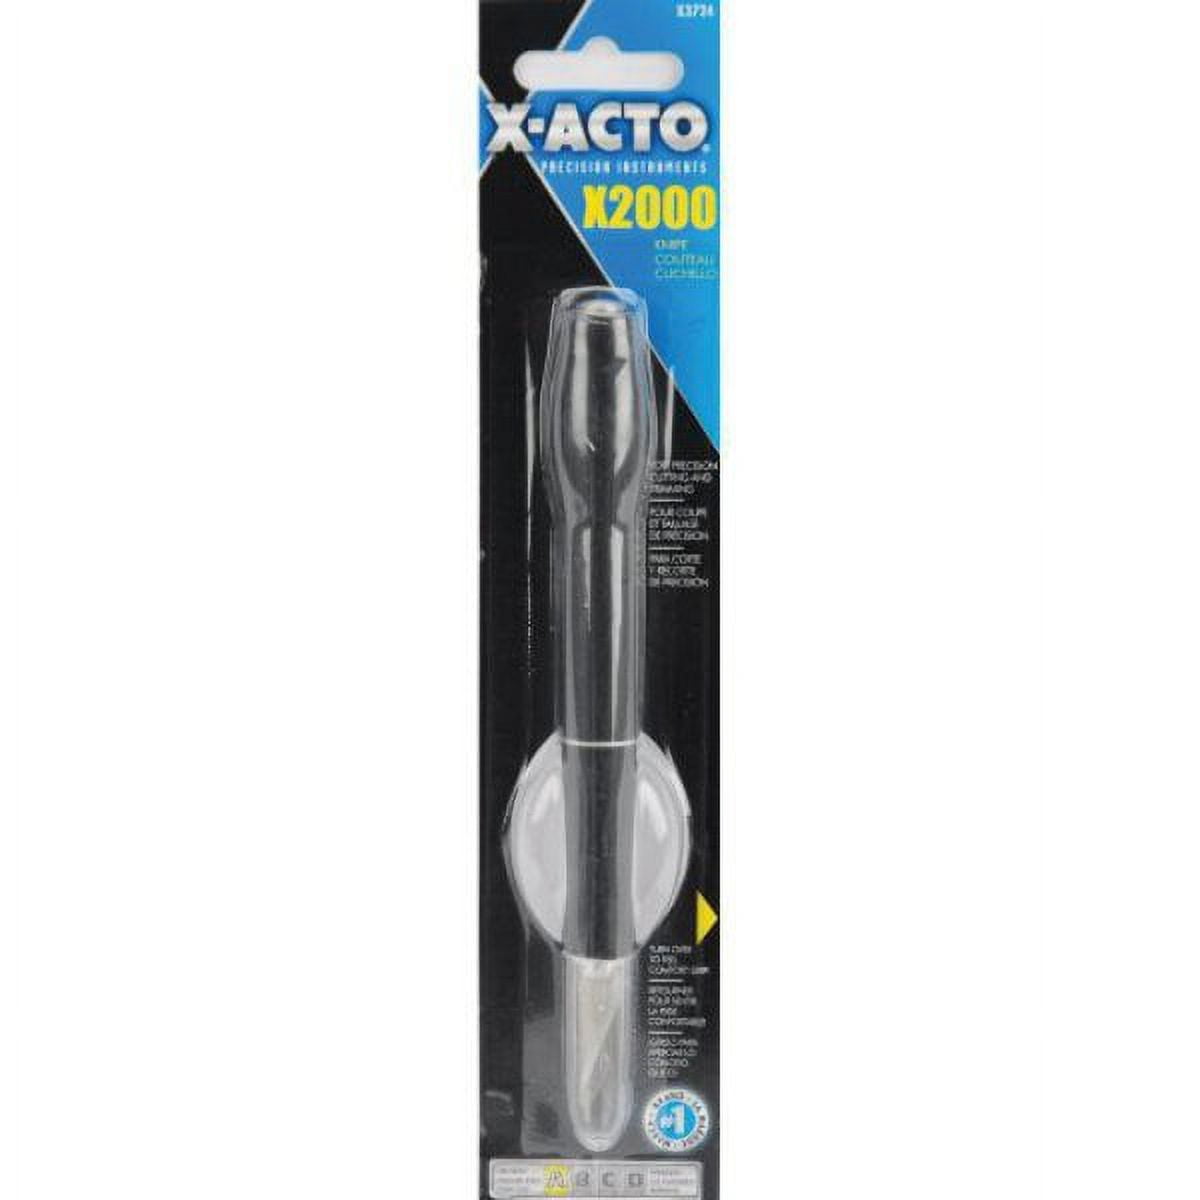  X-ACTO Compression Basic Knife Set, Great for Arts and